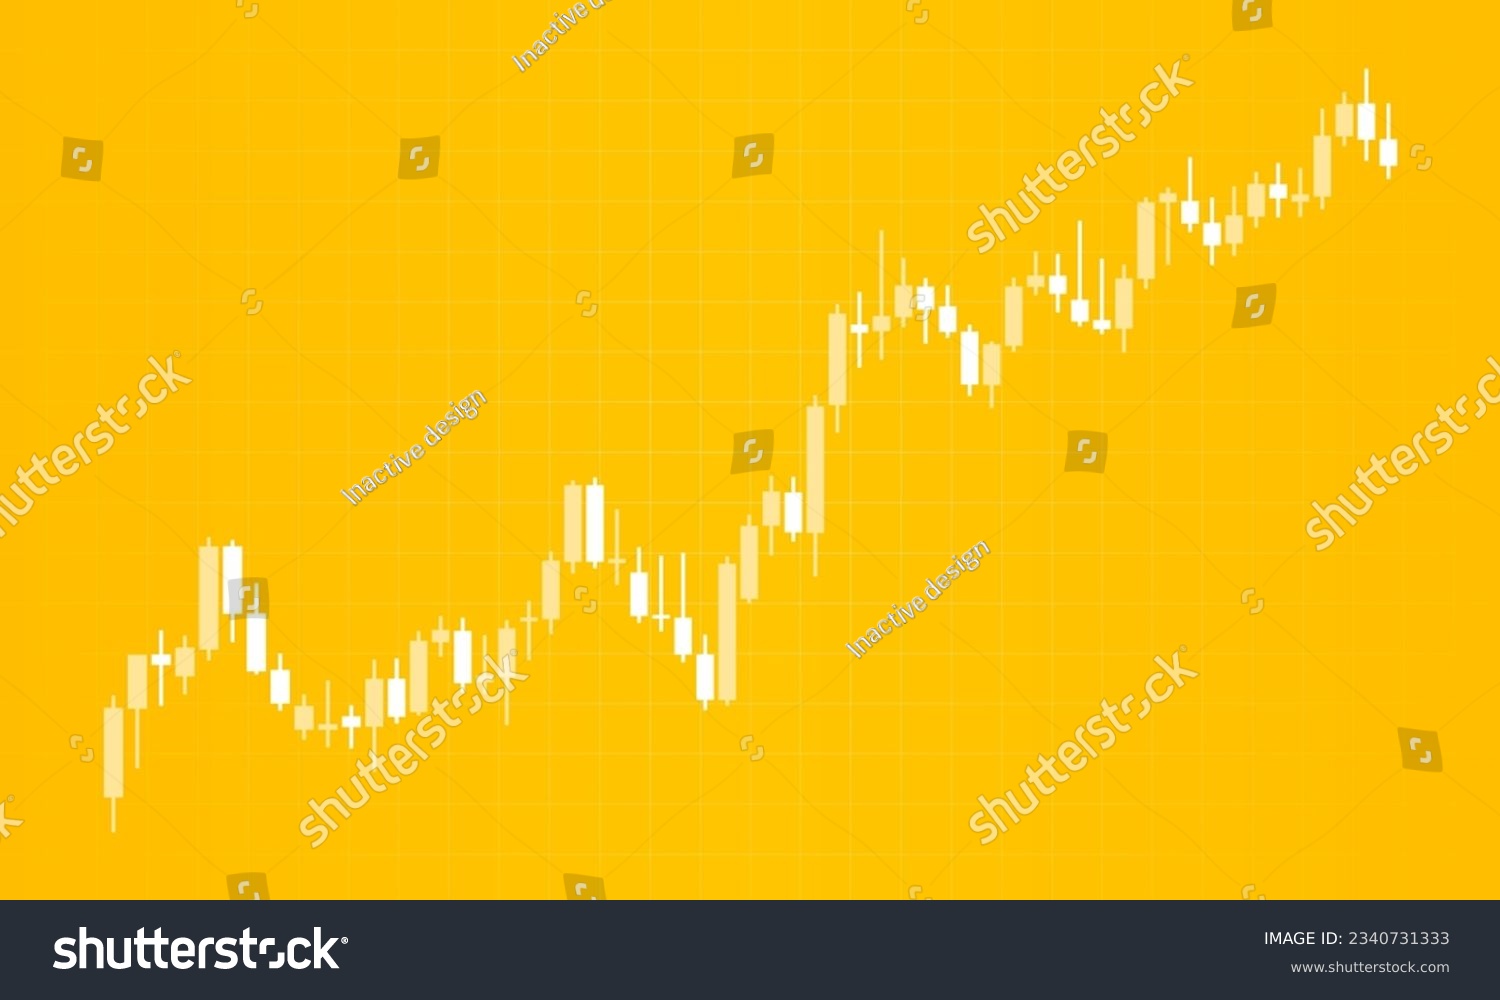 SVG of Business candle stick chart of the stock market on yellow background. Business presentation. Vector illustration. svg